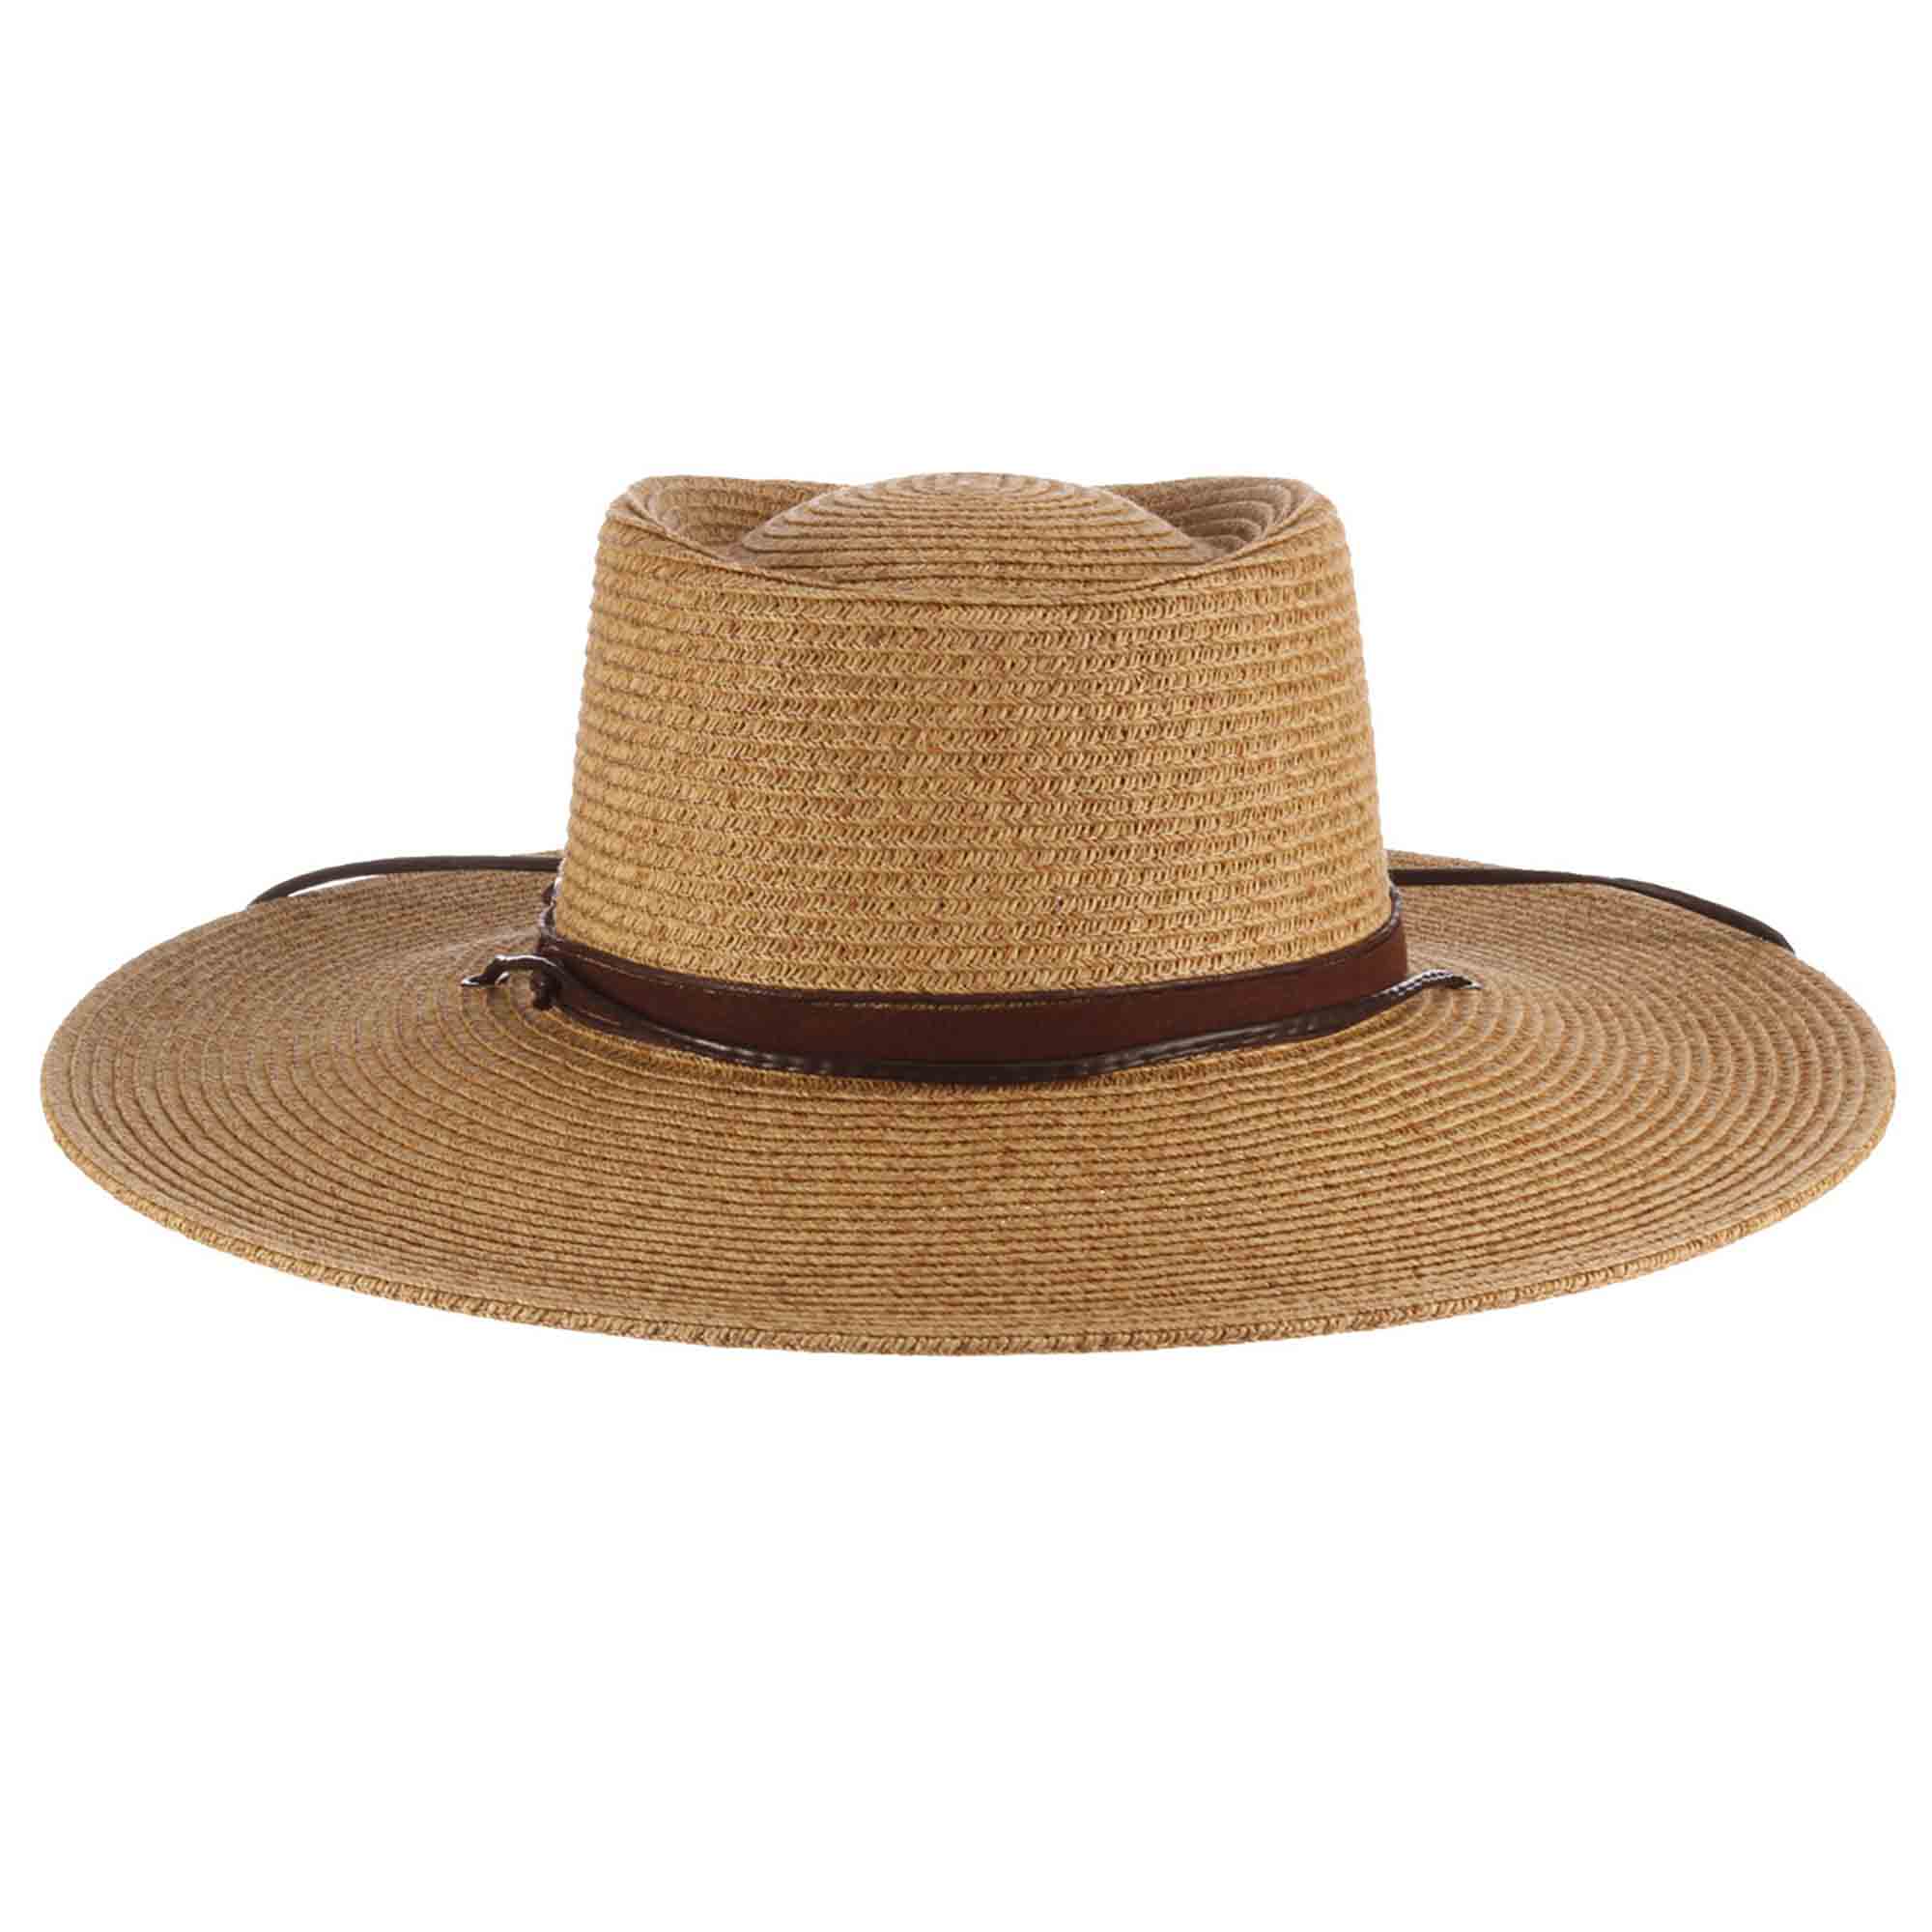 Wide Brim Gaucho Hat with Chin Cord - Scala Hats Natural